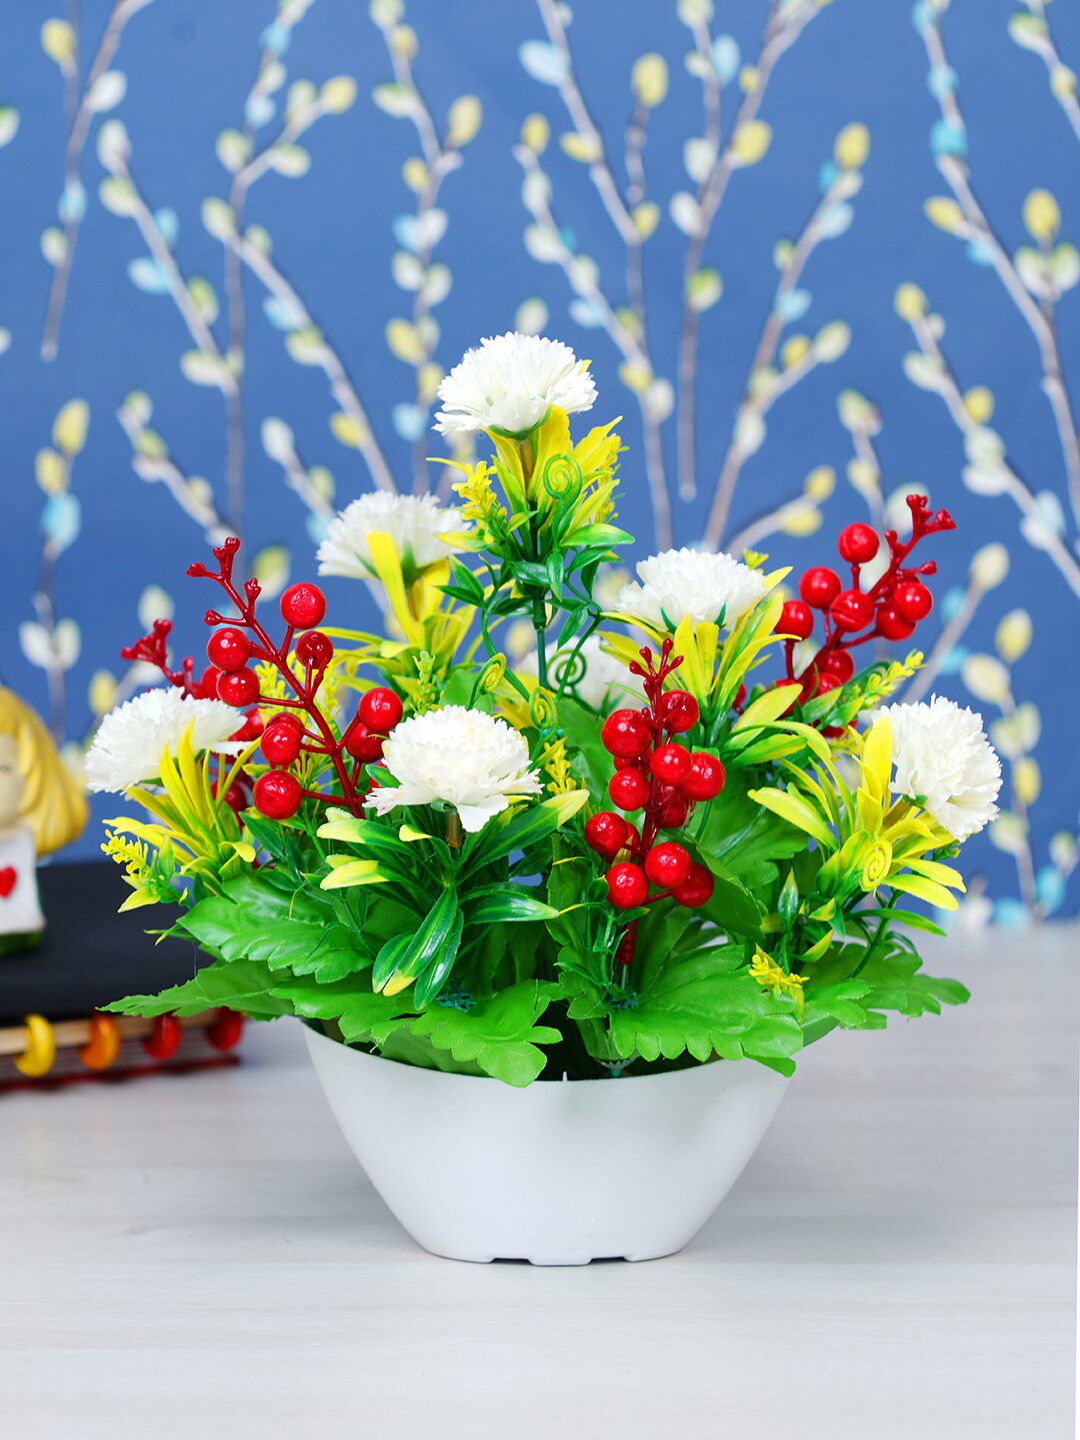 Dekorly White & Green White Carn Basket Artificial Flower & Plant With Pot Price in India